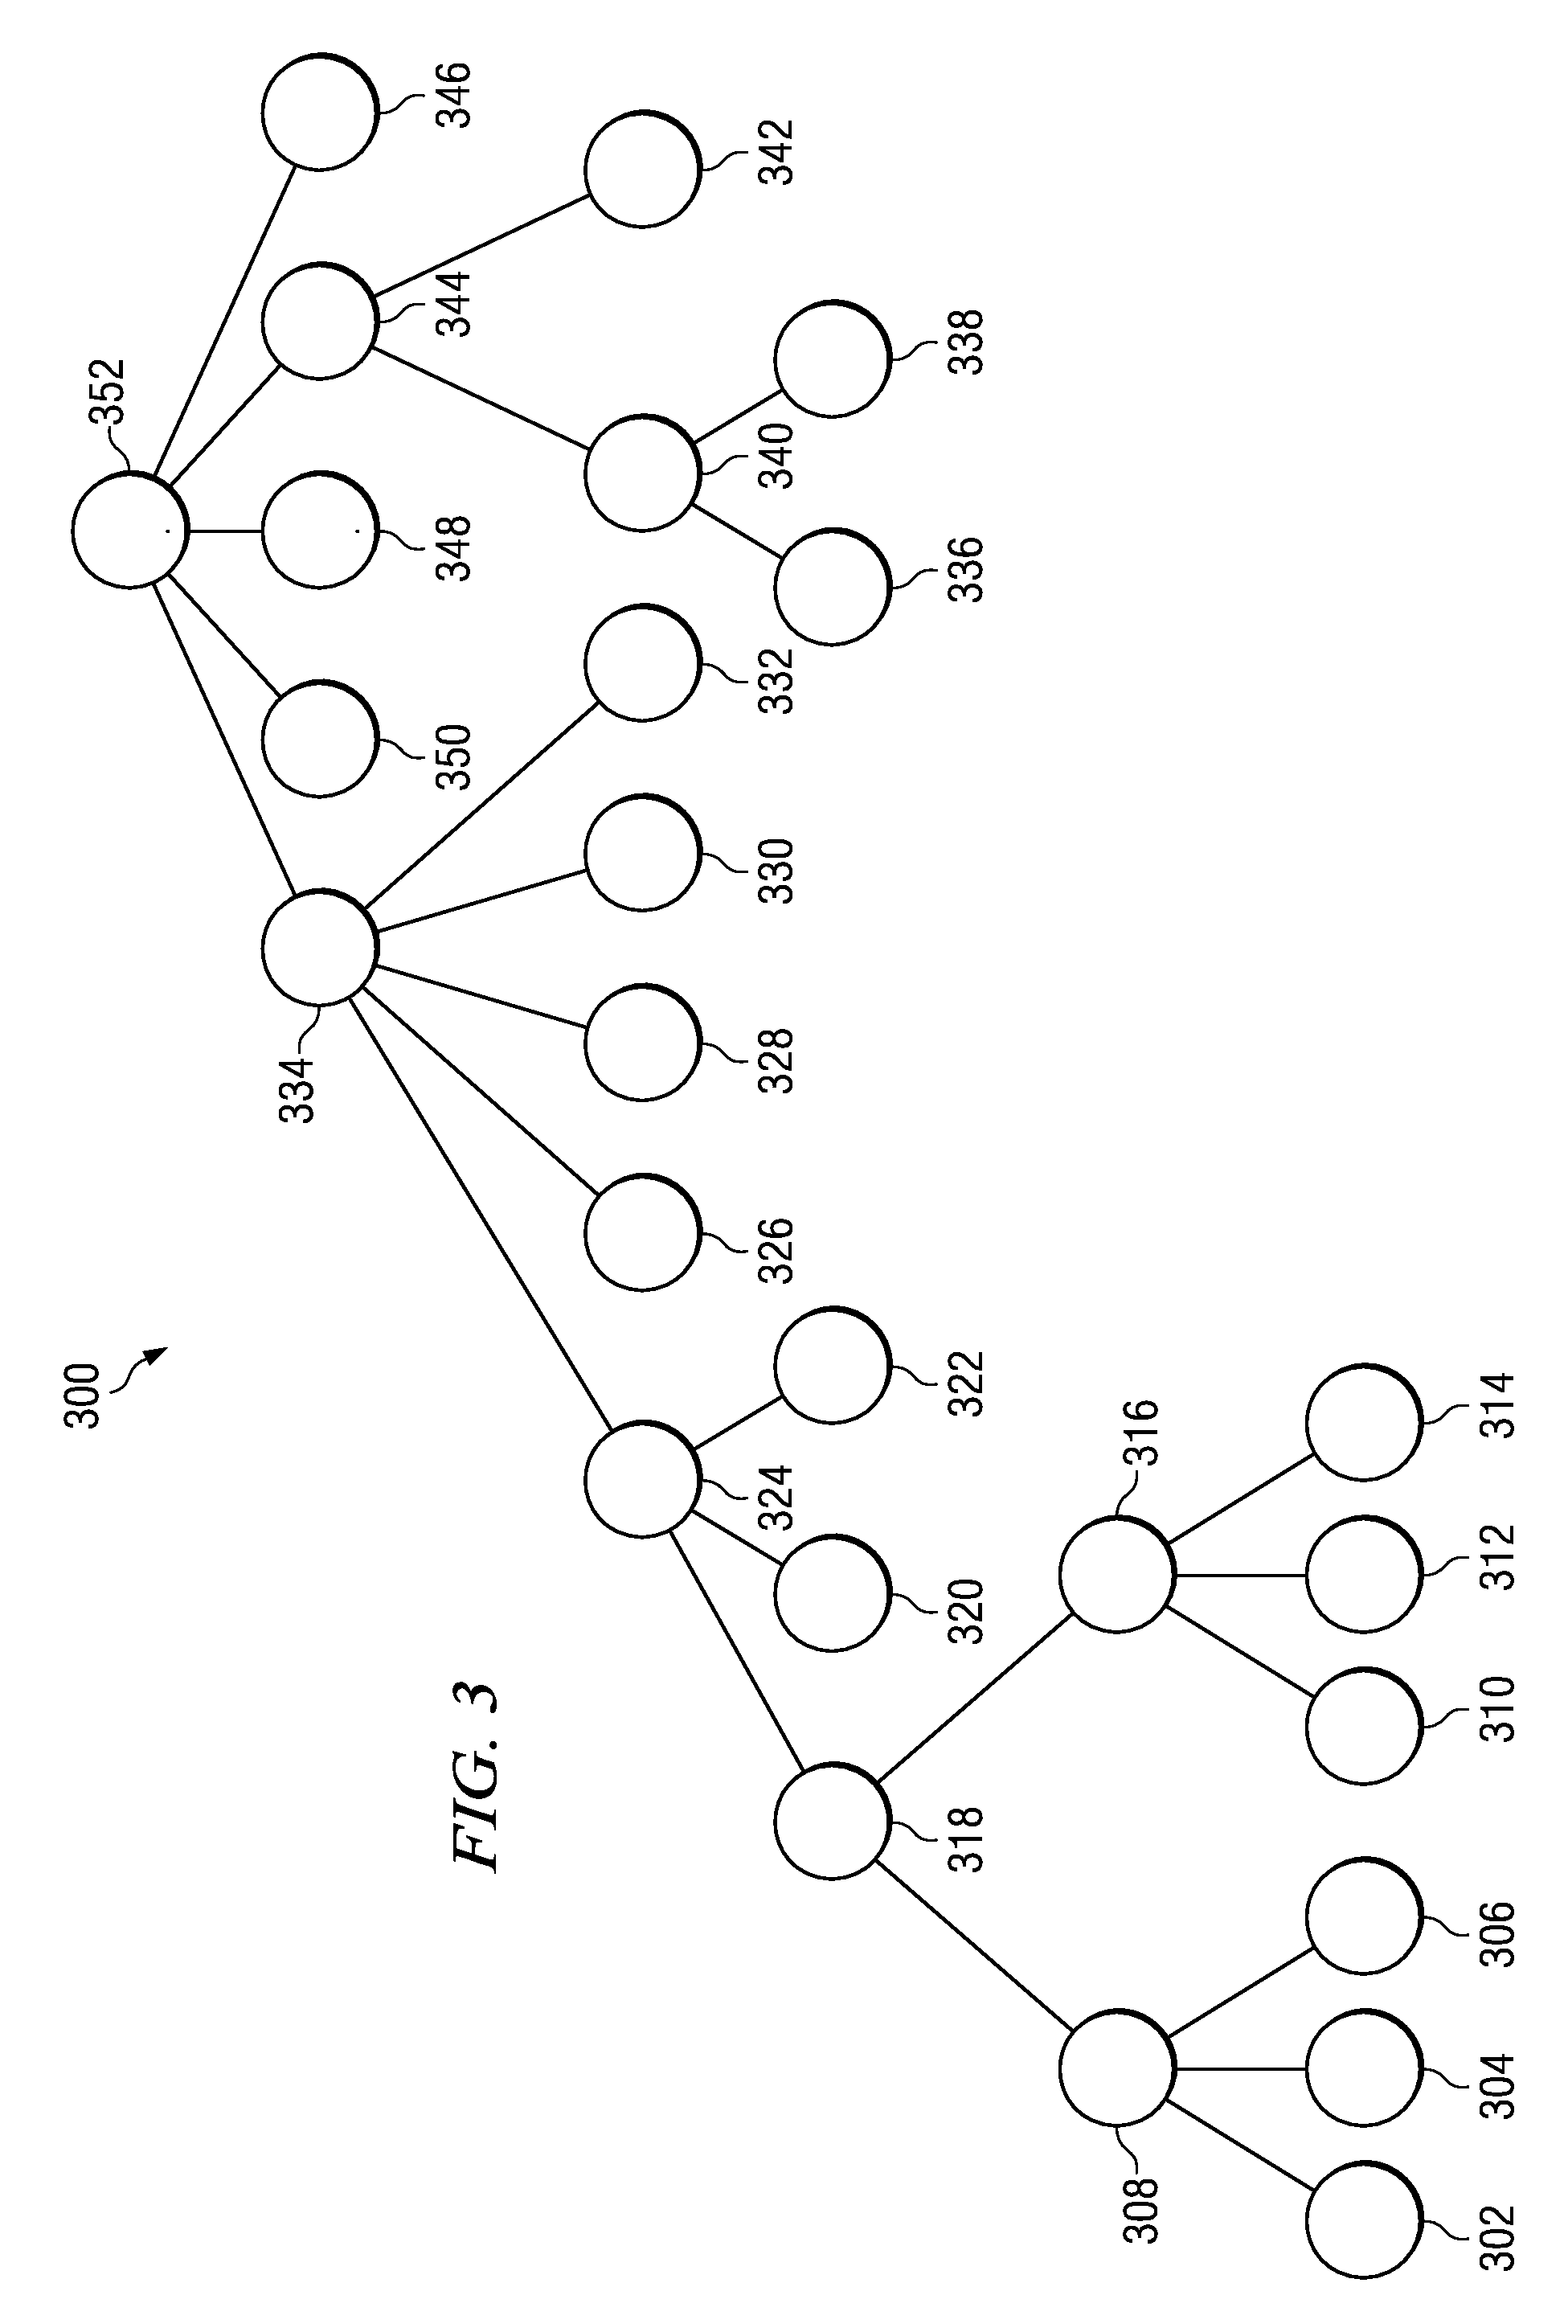 Real-time identification of sub-assemblies containing nested parts